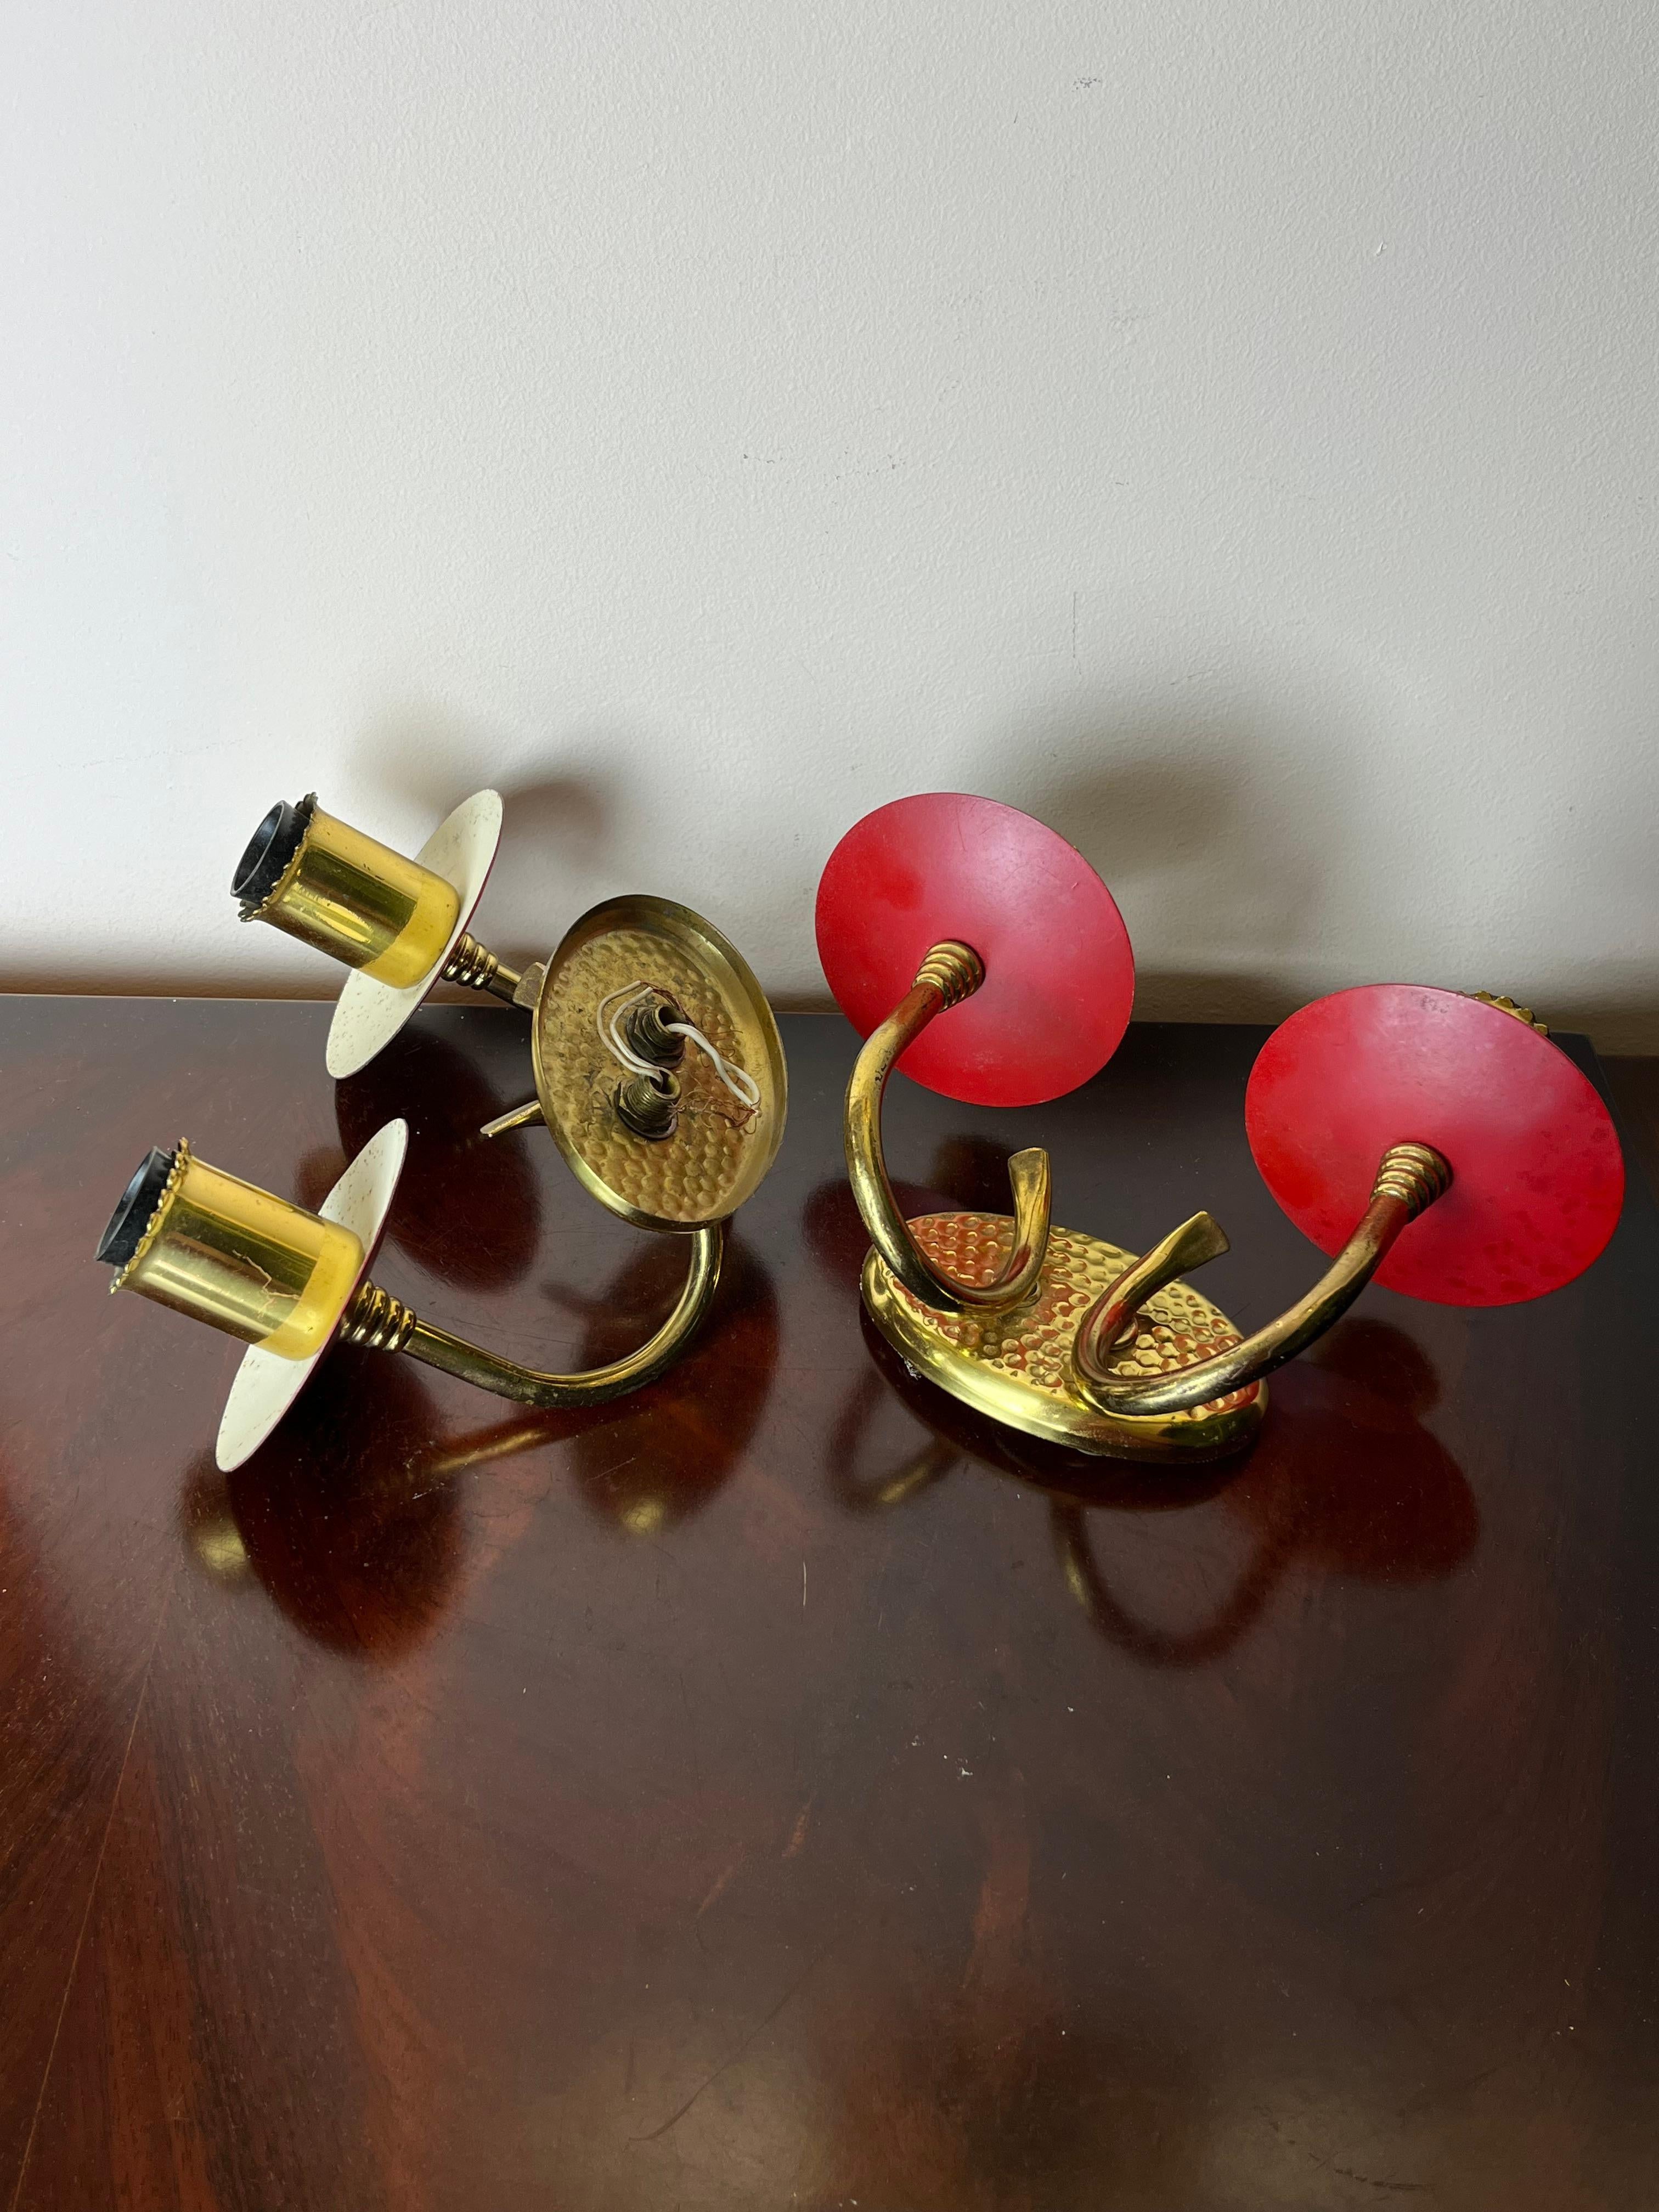 Set of 2 wall lamps in brass and colored aluminium, Made in Italy, 1950s
E14 lamps
Good conditions.